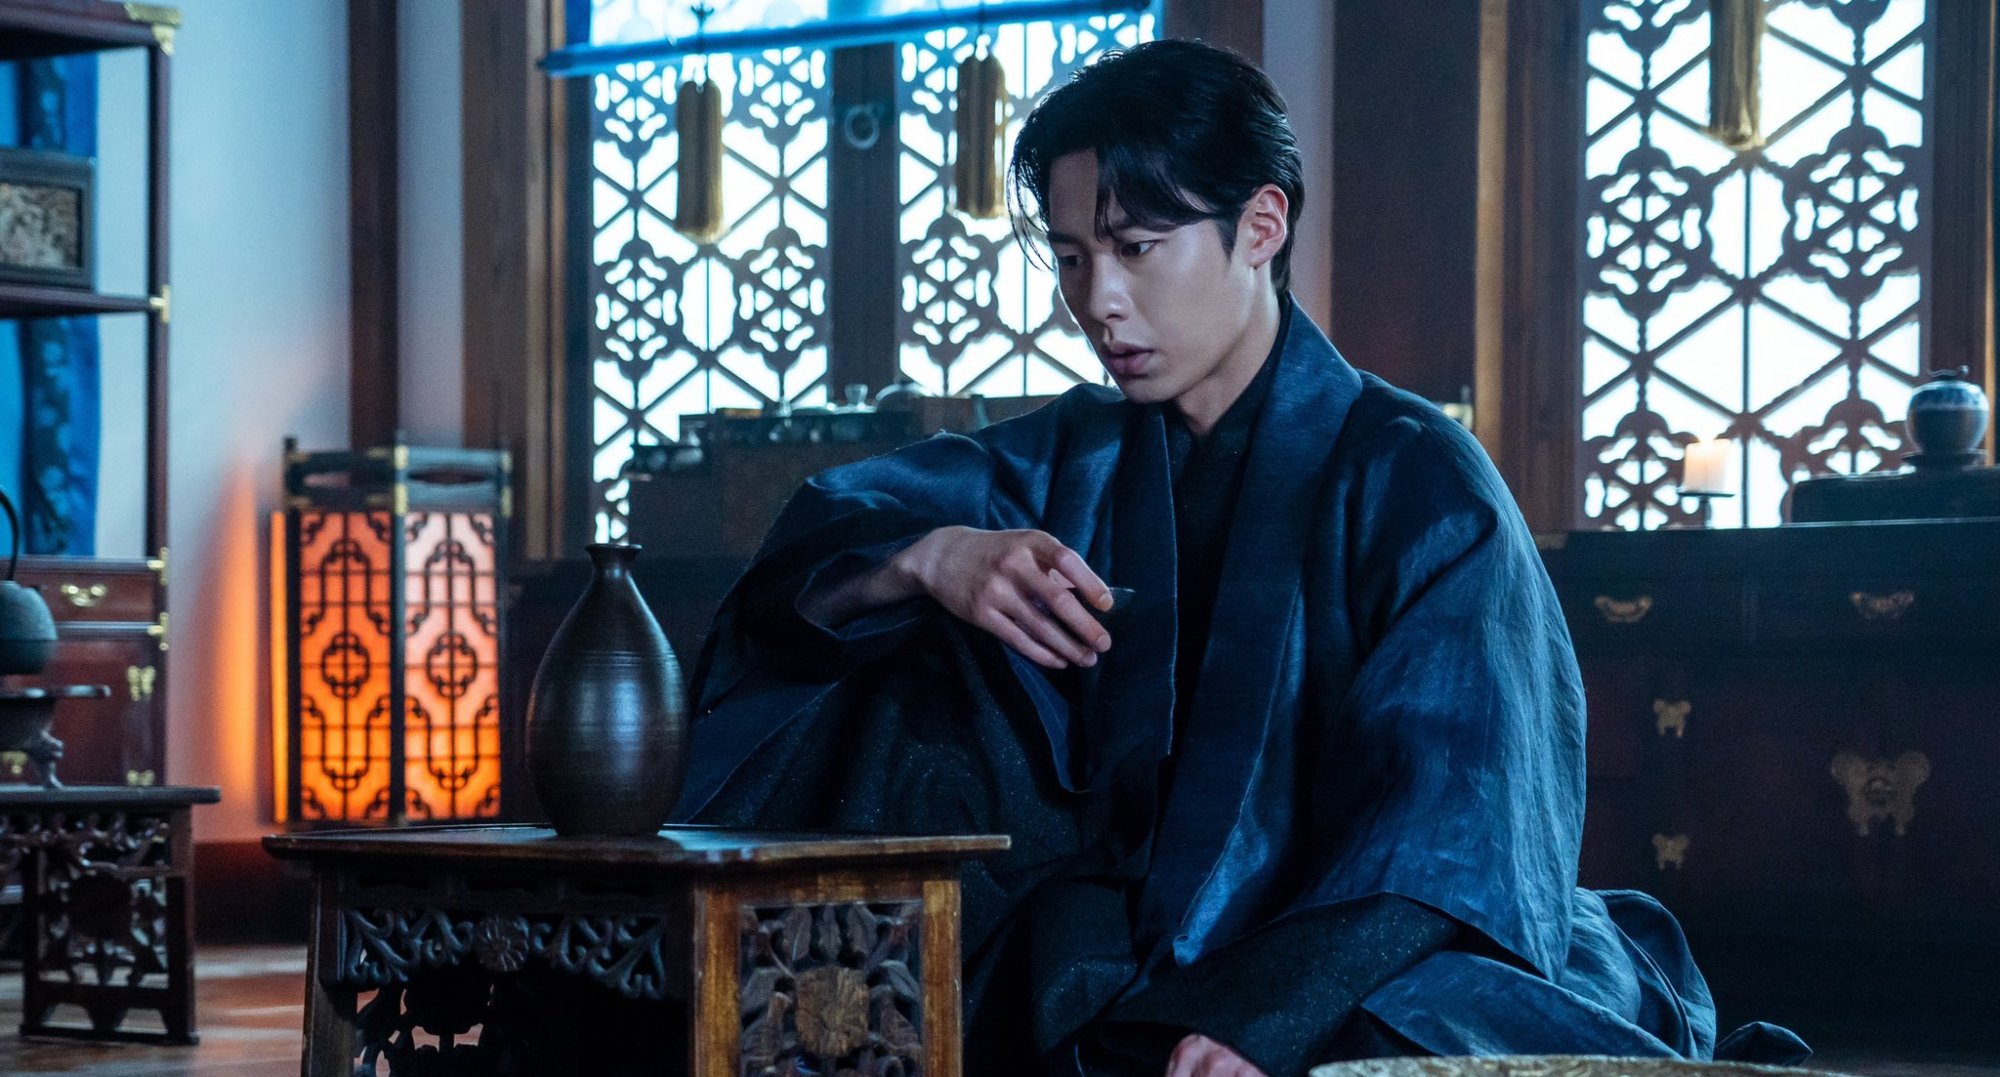 'Alchemy of Souls' Season 2 A Breakdown of What Has Happened to Jang Uk After the First Season